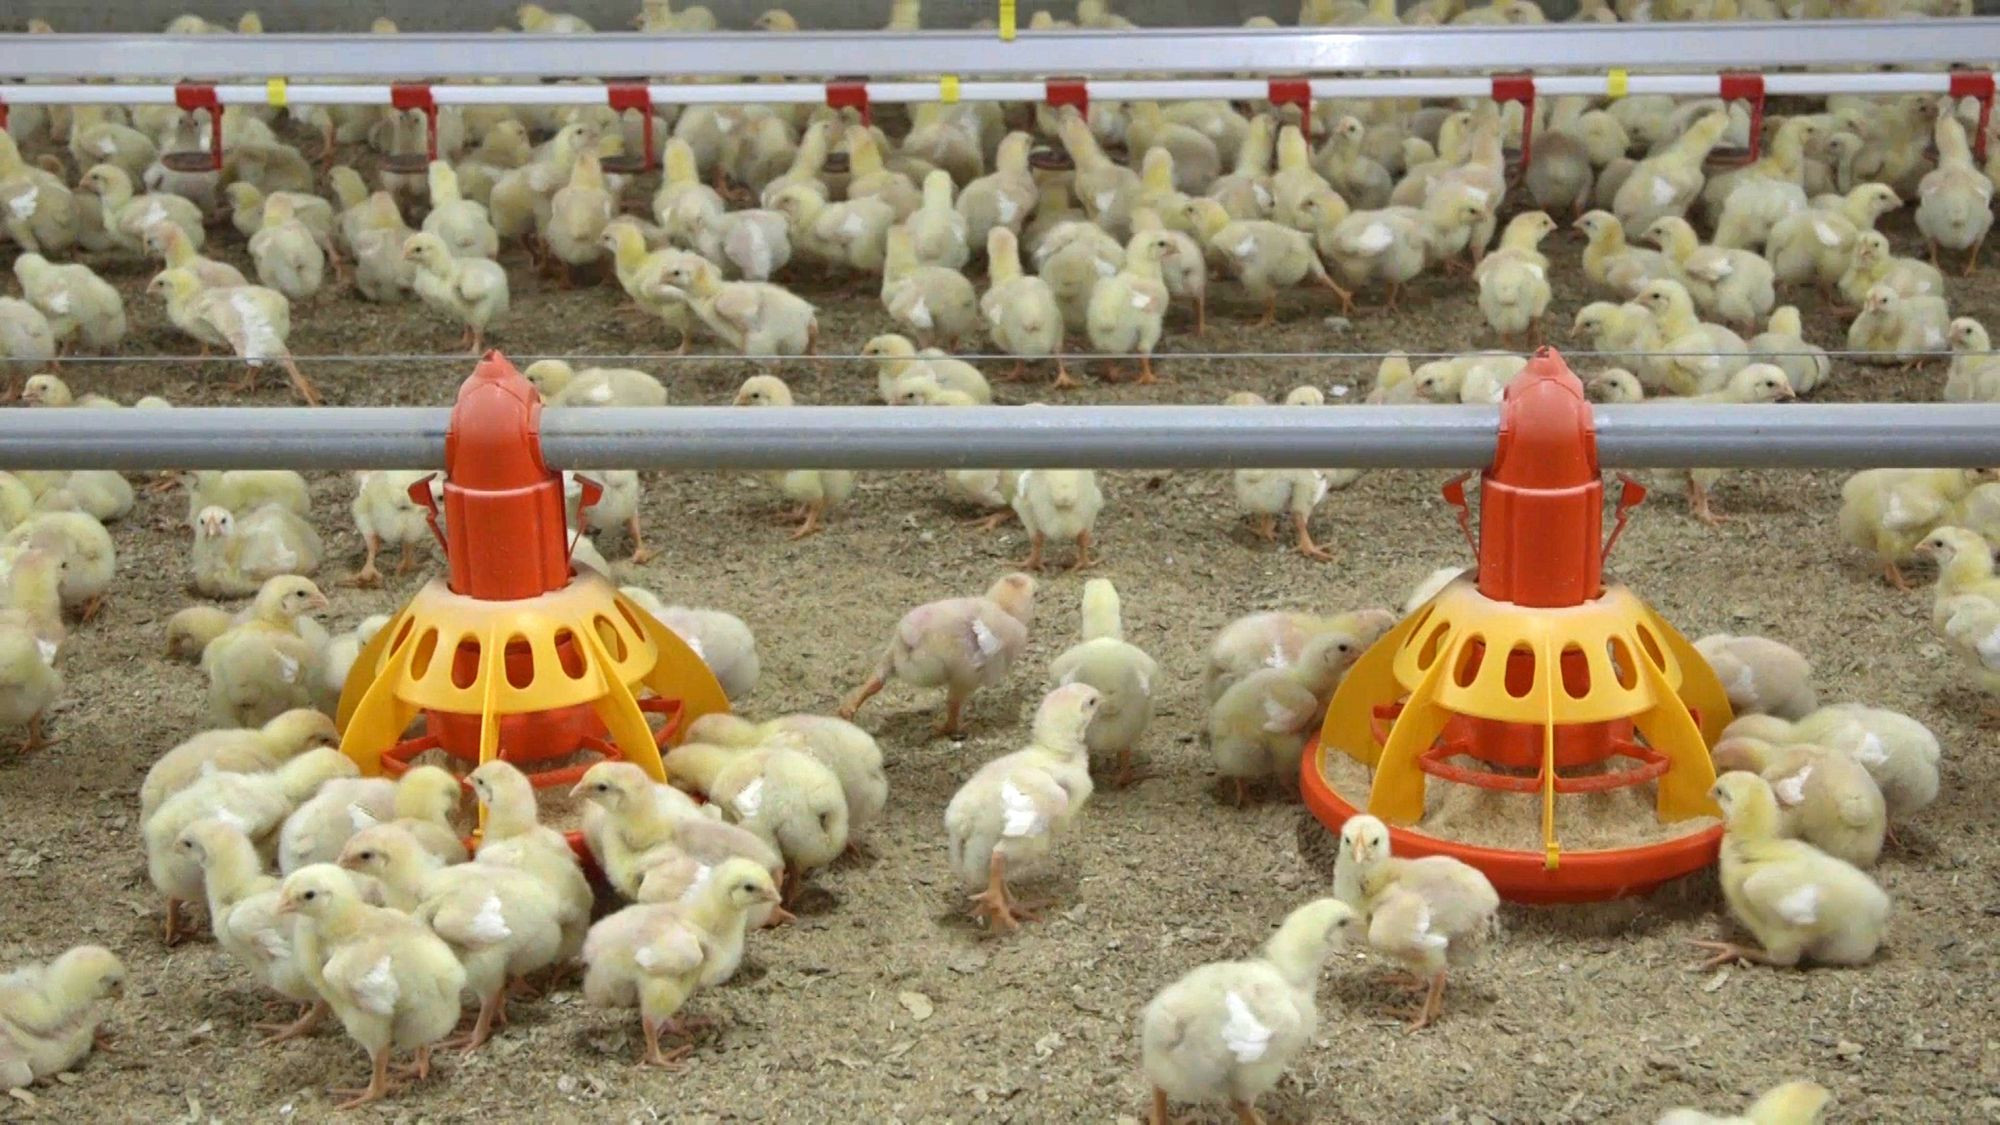 How are global food brands protecting farm animals?